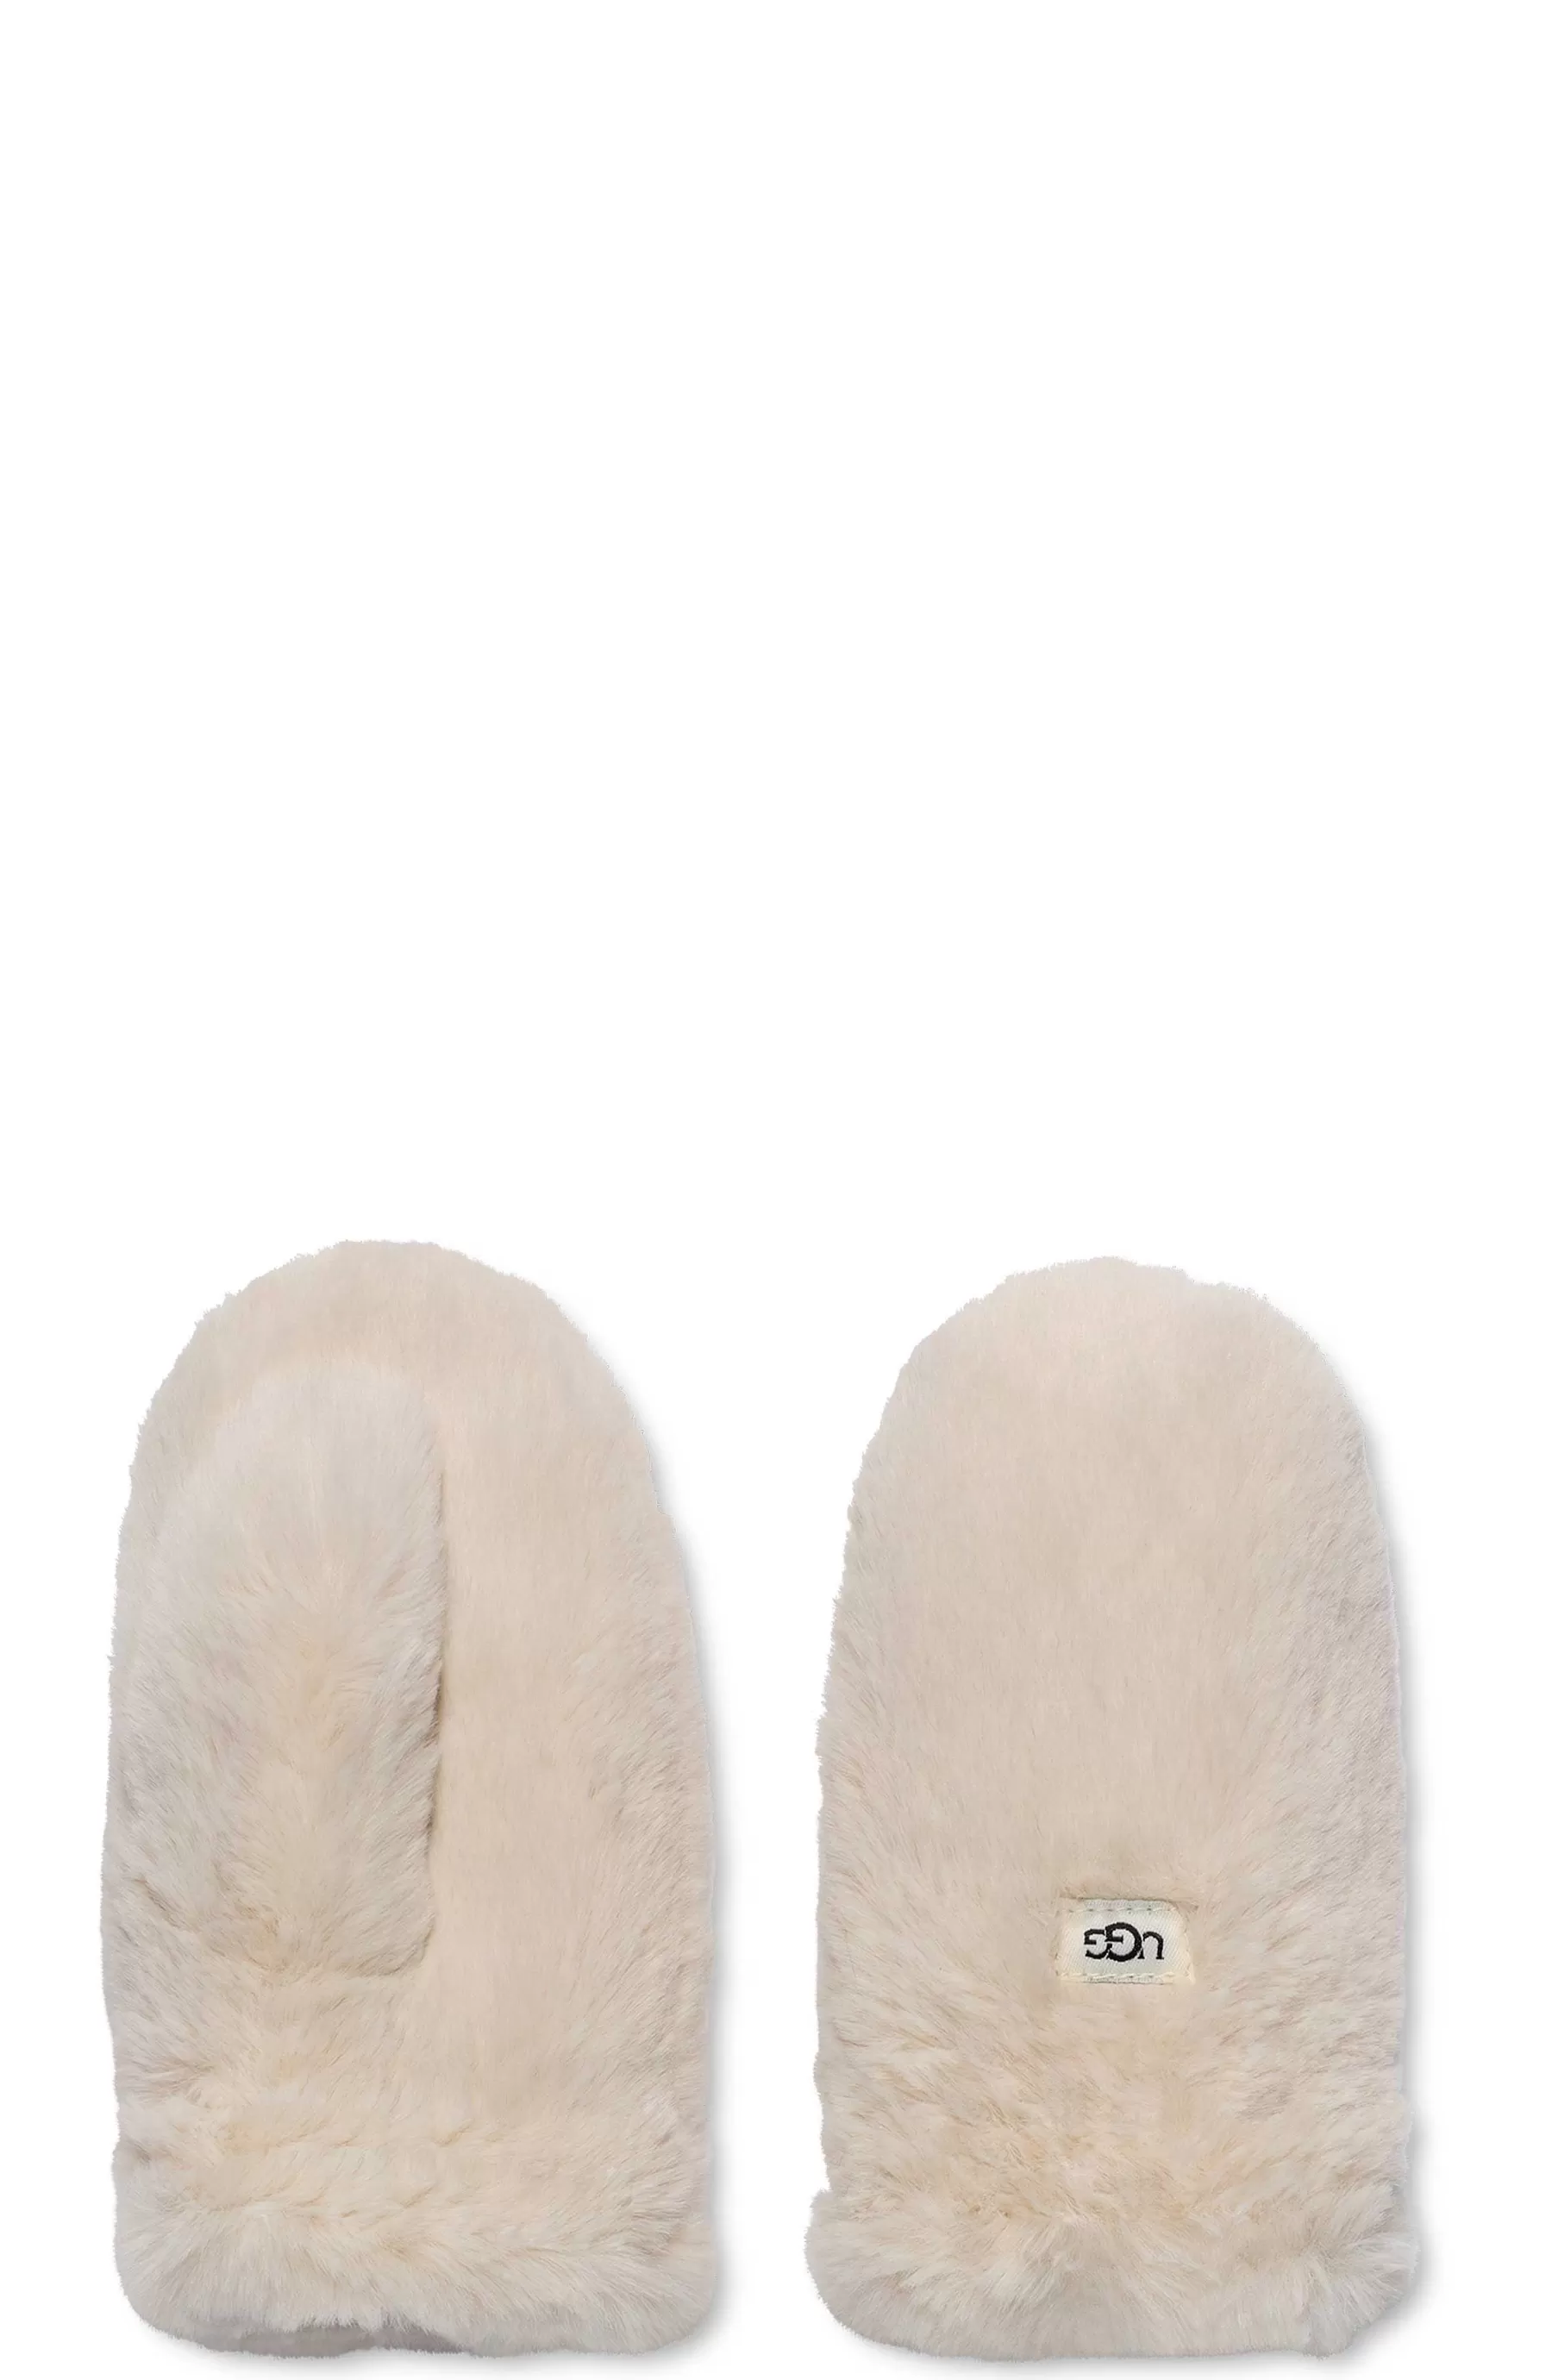 Mitaines en fausse fourrure, | UGG Store